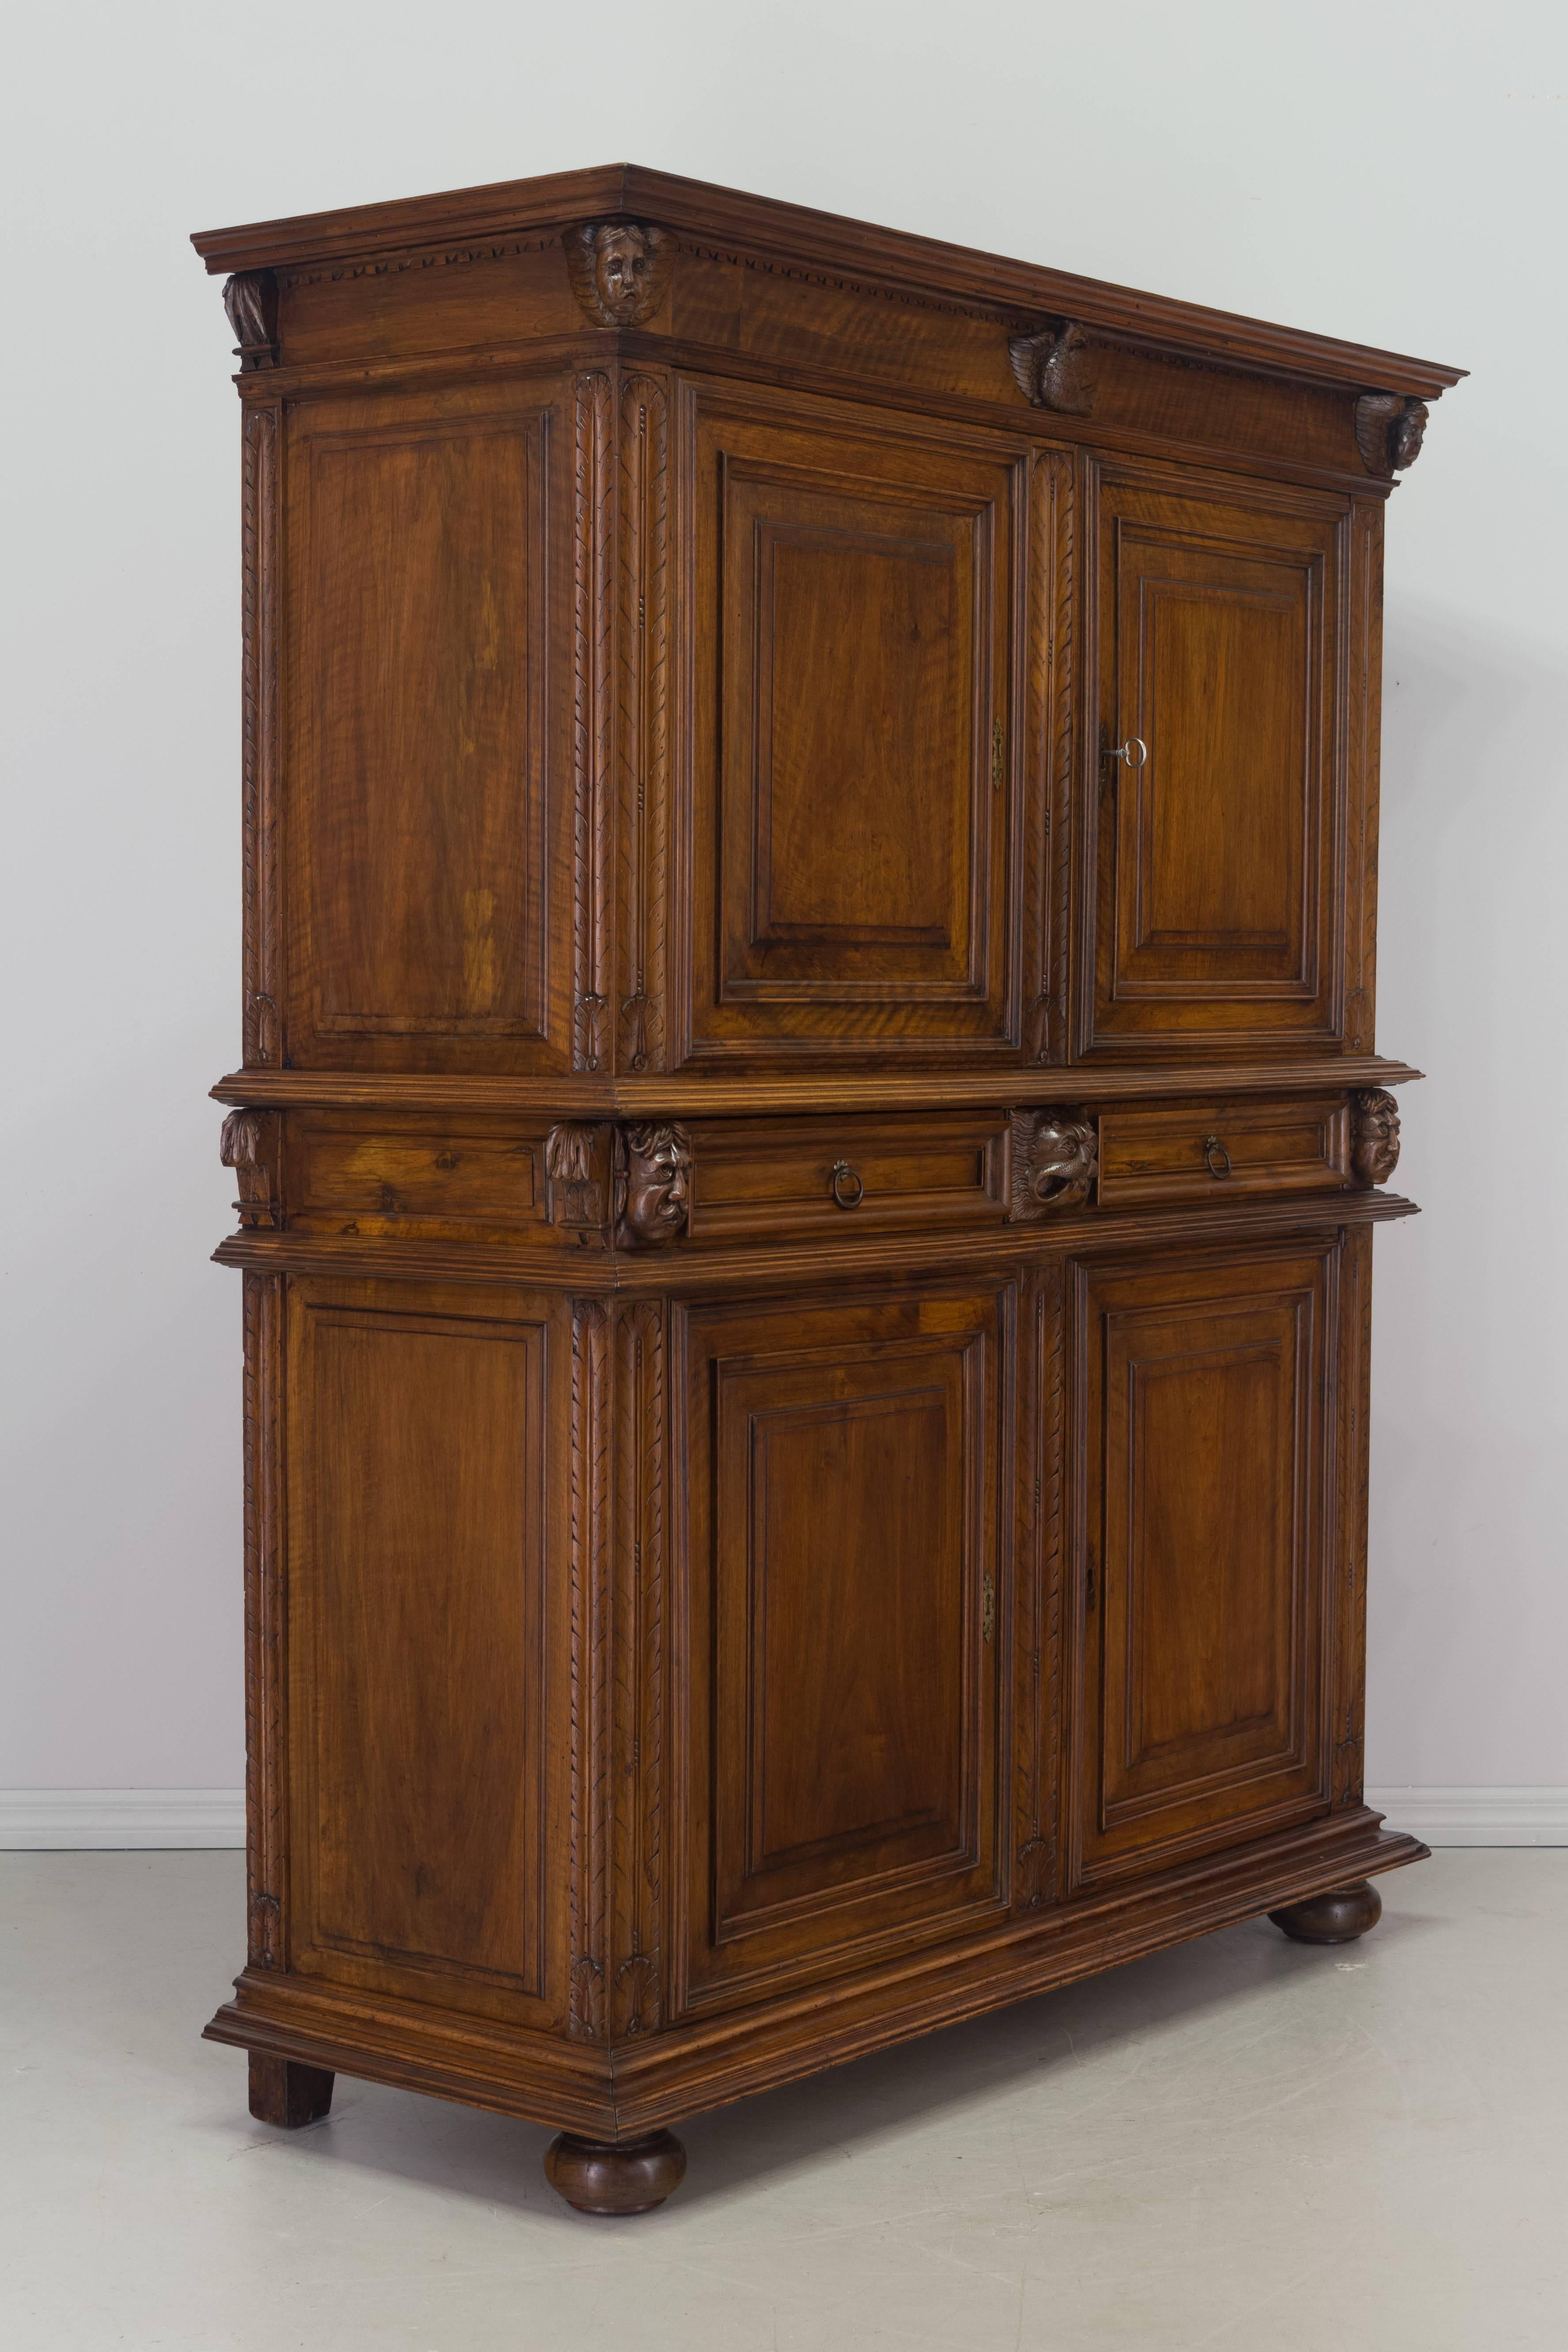 19th century Louis XIV style buffet à deux corps, or two-part buffet, made of solid walnut with four doors and three dovetailed drawers. Nice hand-carved sculptural details. The bottom opens to one interior shelf and the upper part provides ample